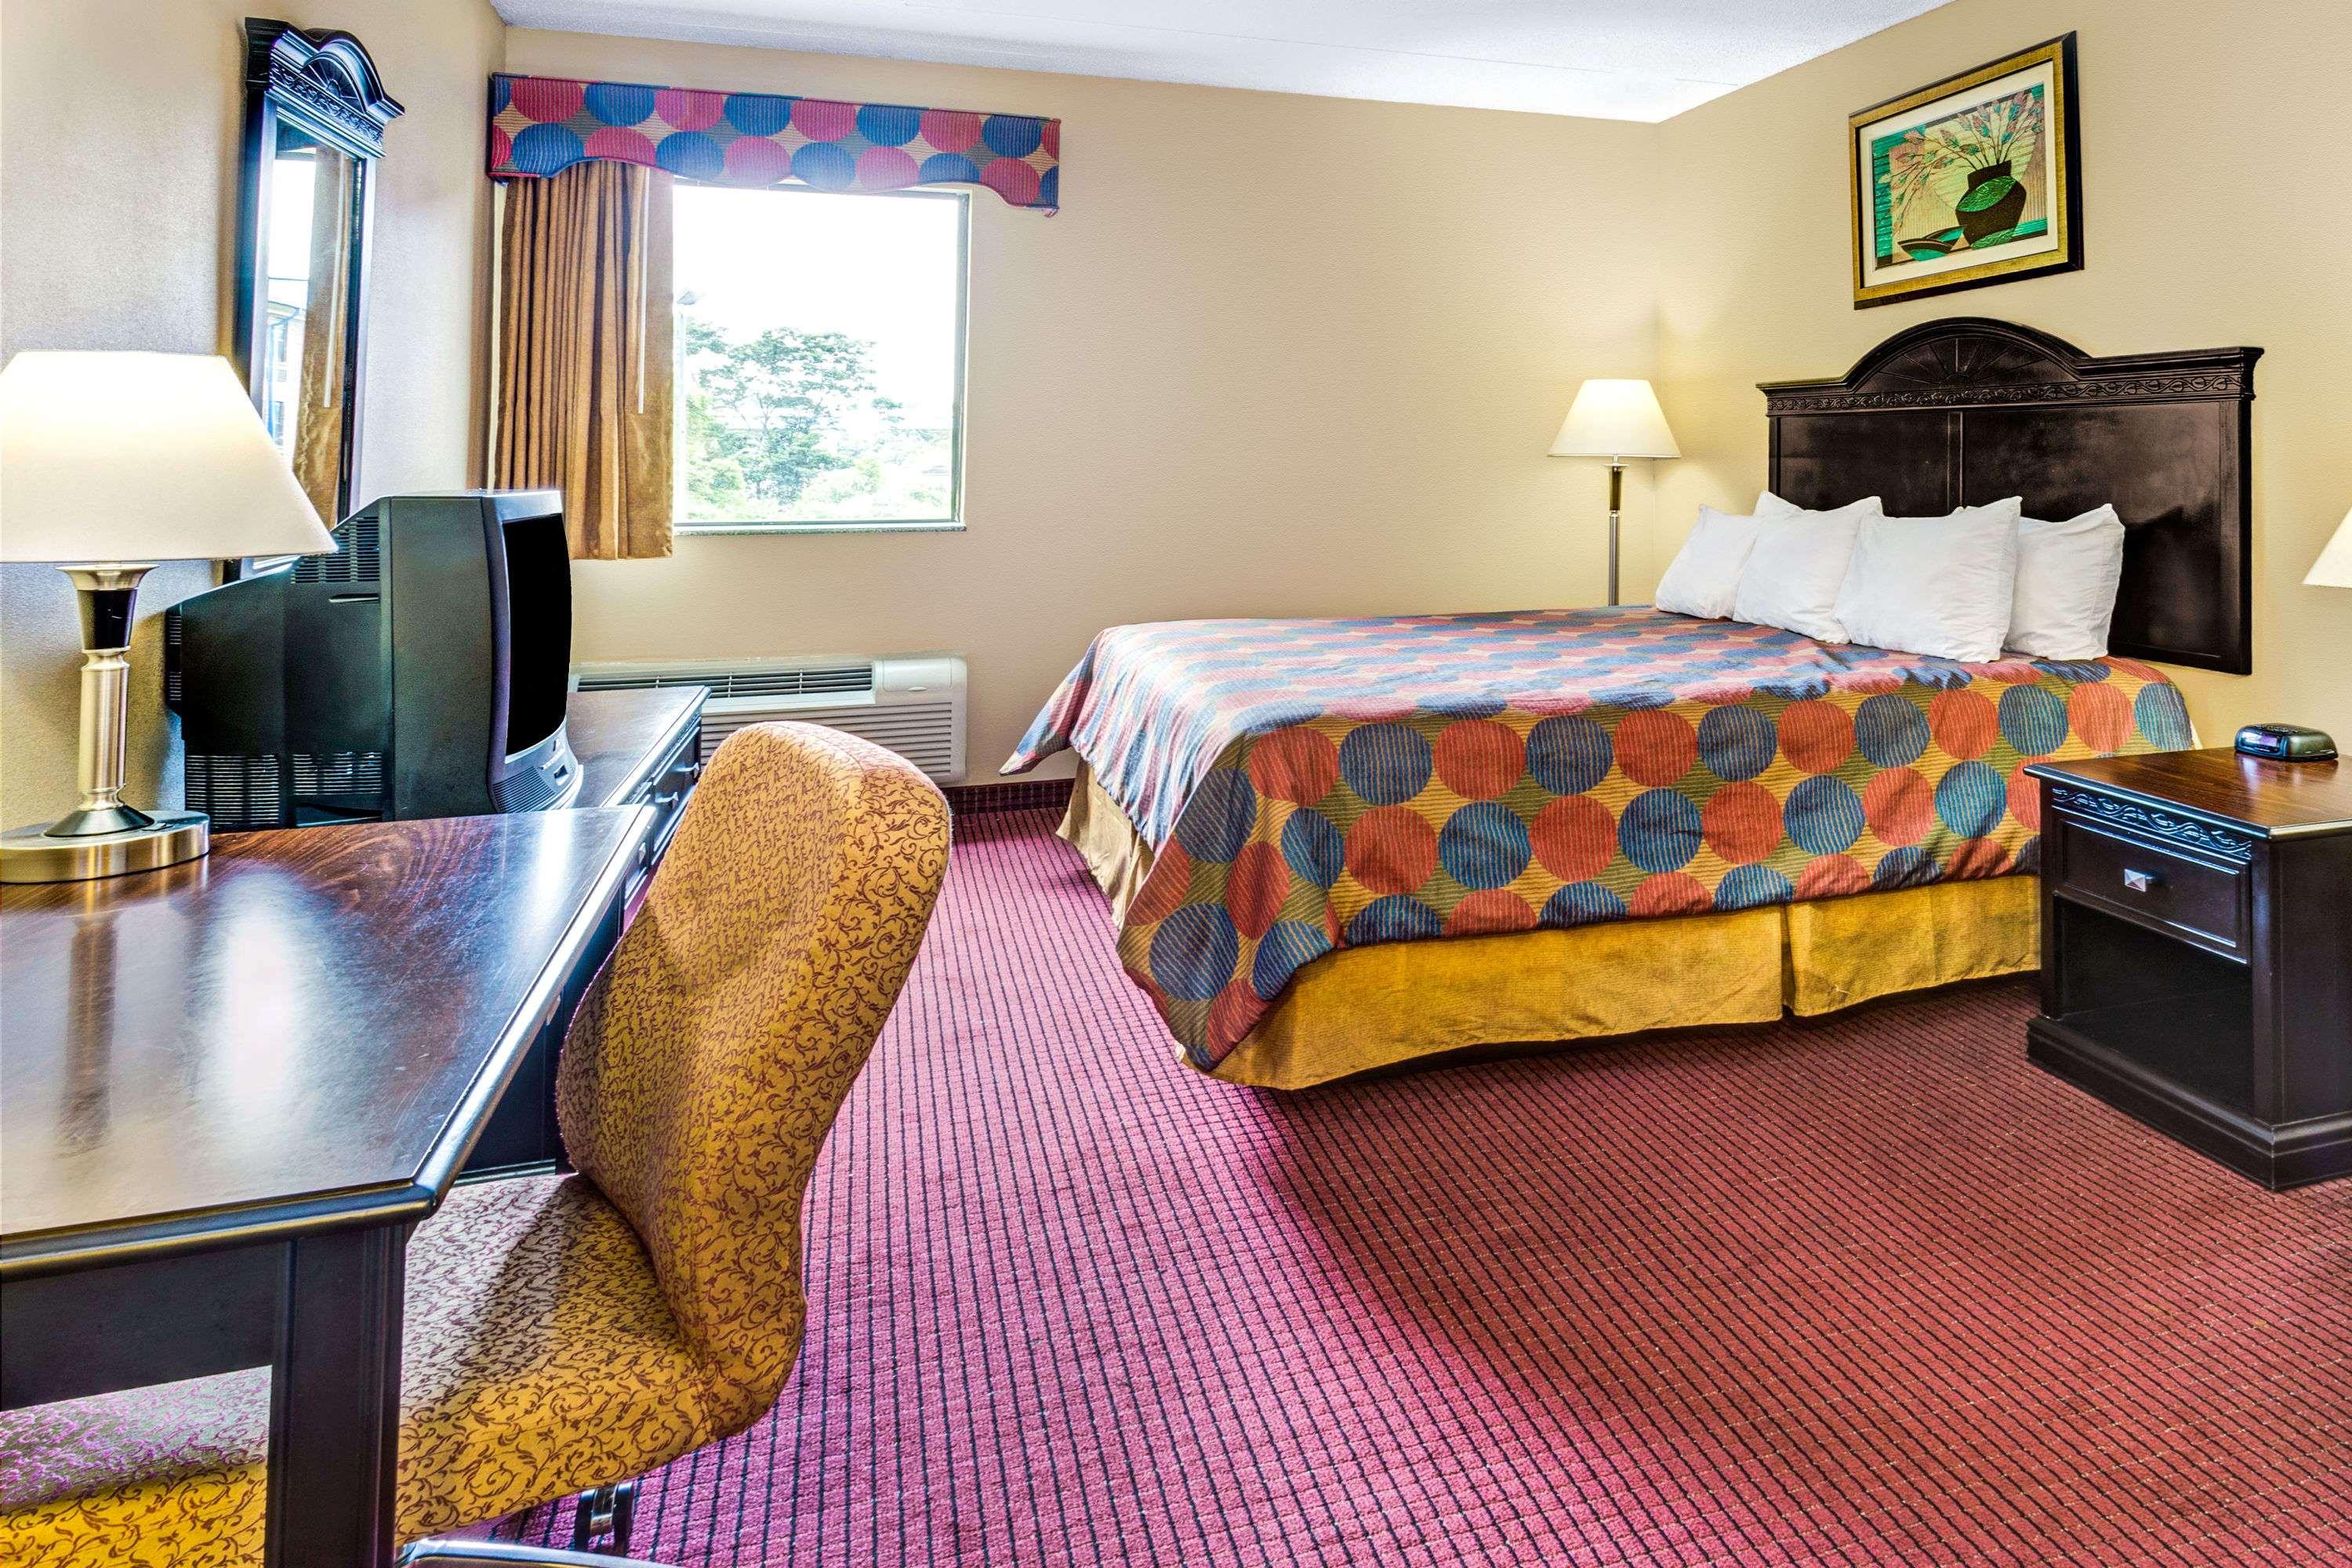 Days Inn and Suites Jeffersonville